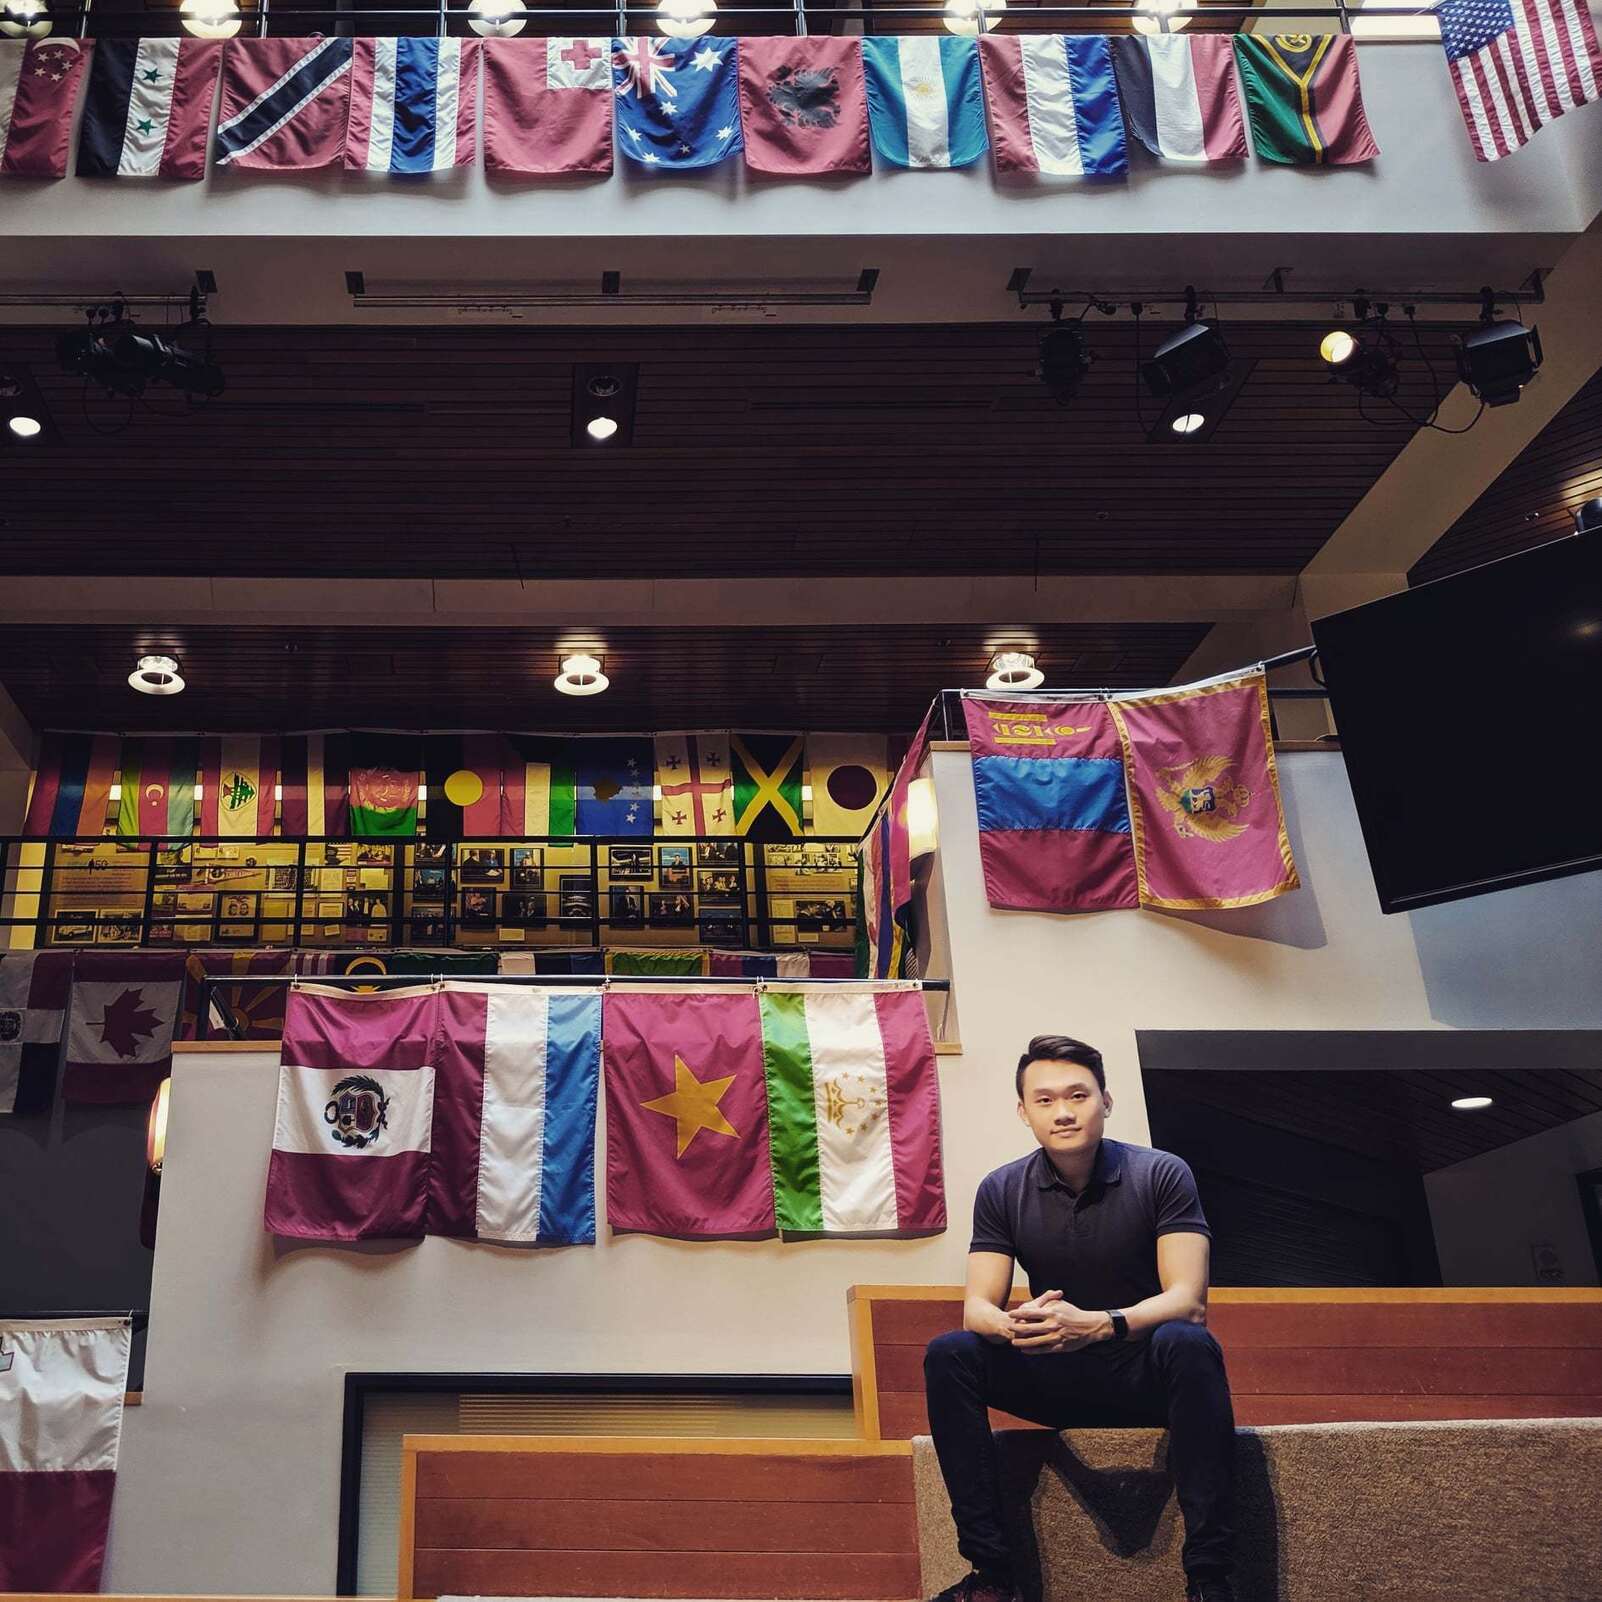 Vietnamese graduate from Harvard University encourages students to follow their own path, not the crowd